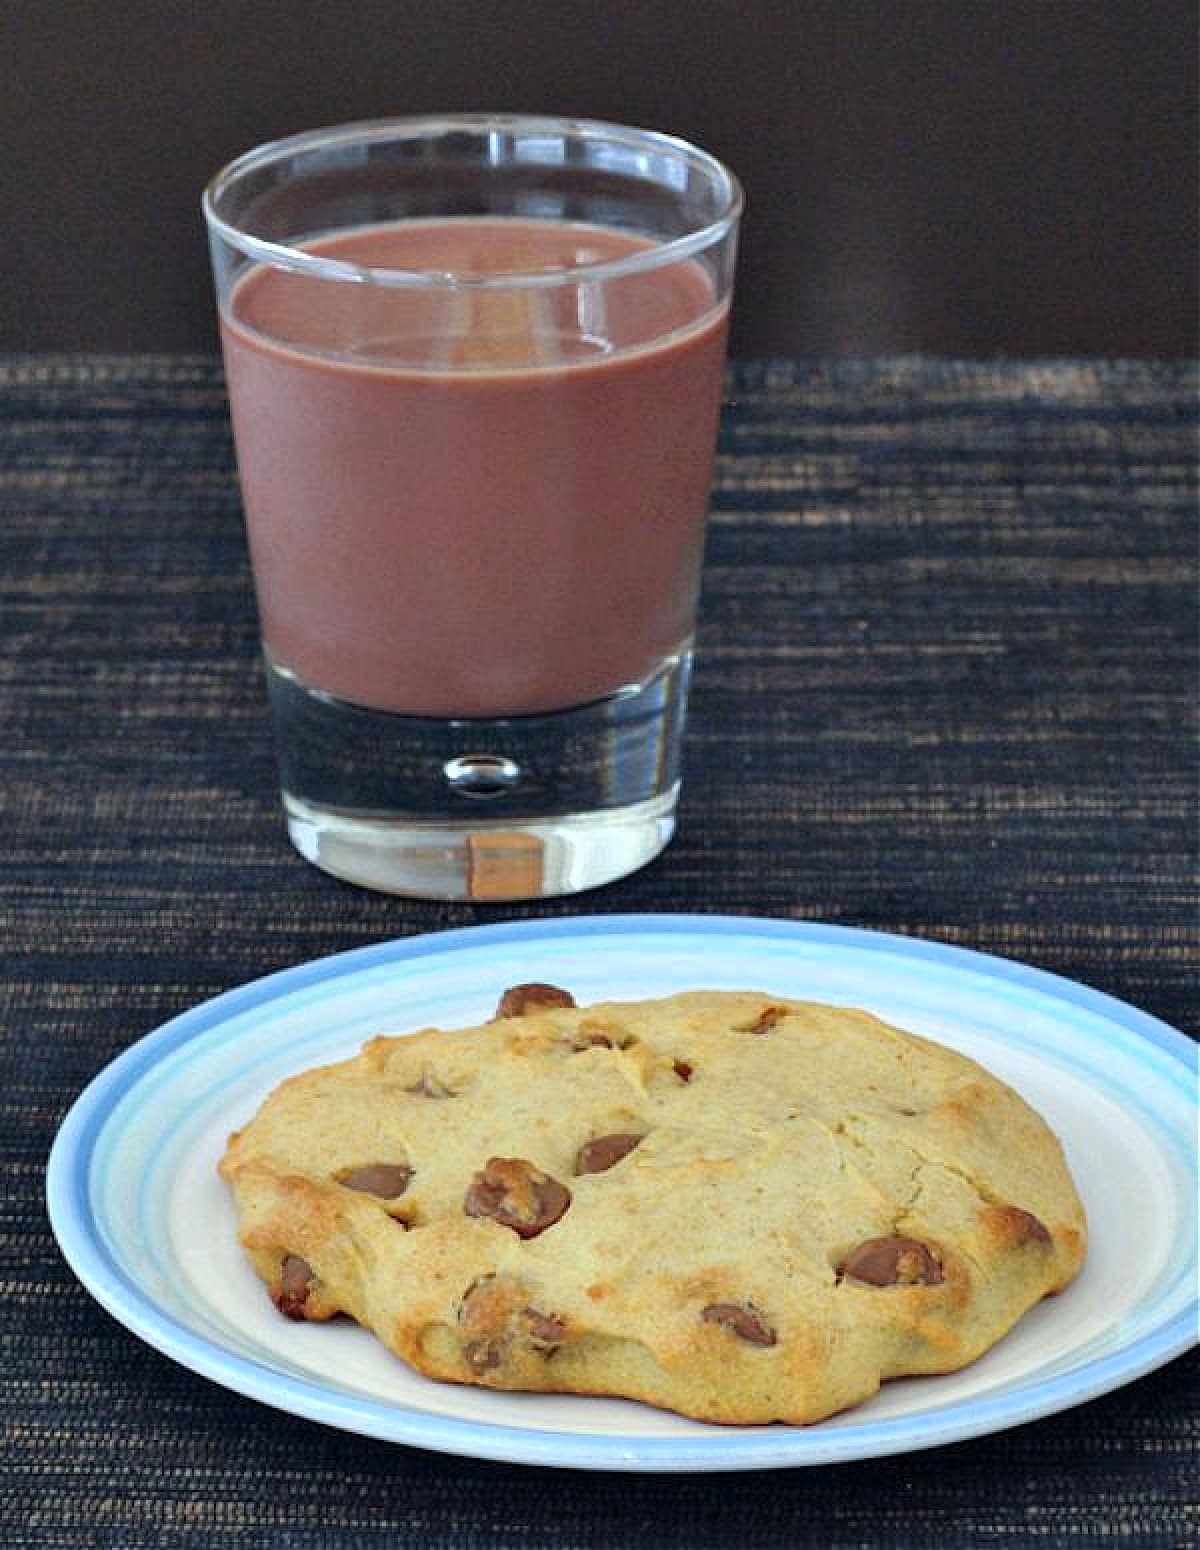 A single serve chocolate chip cookie on a white plate. A short glass of chocolate milk sits next to the plate.